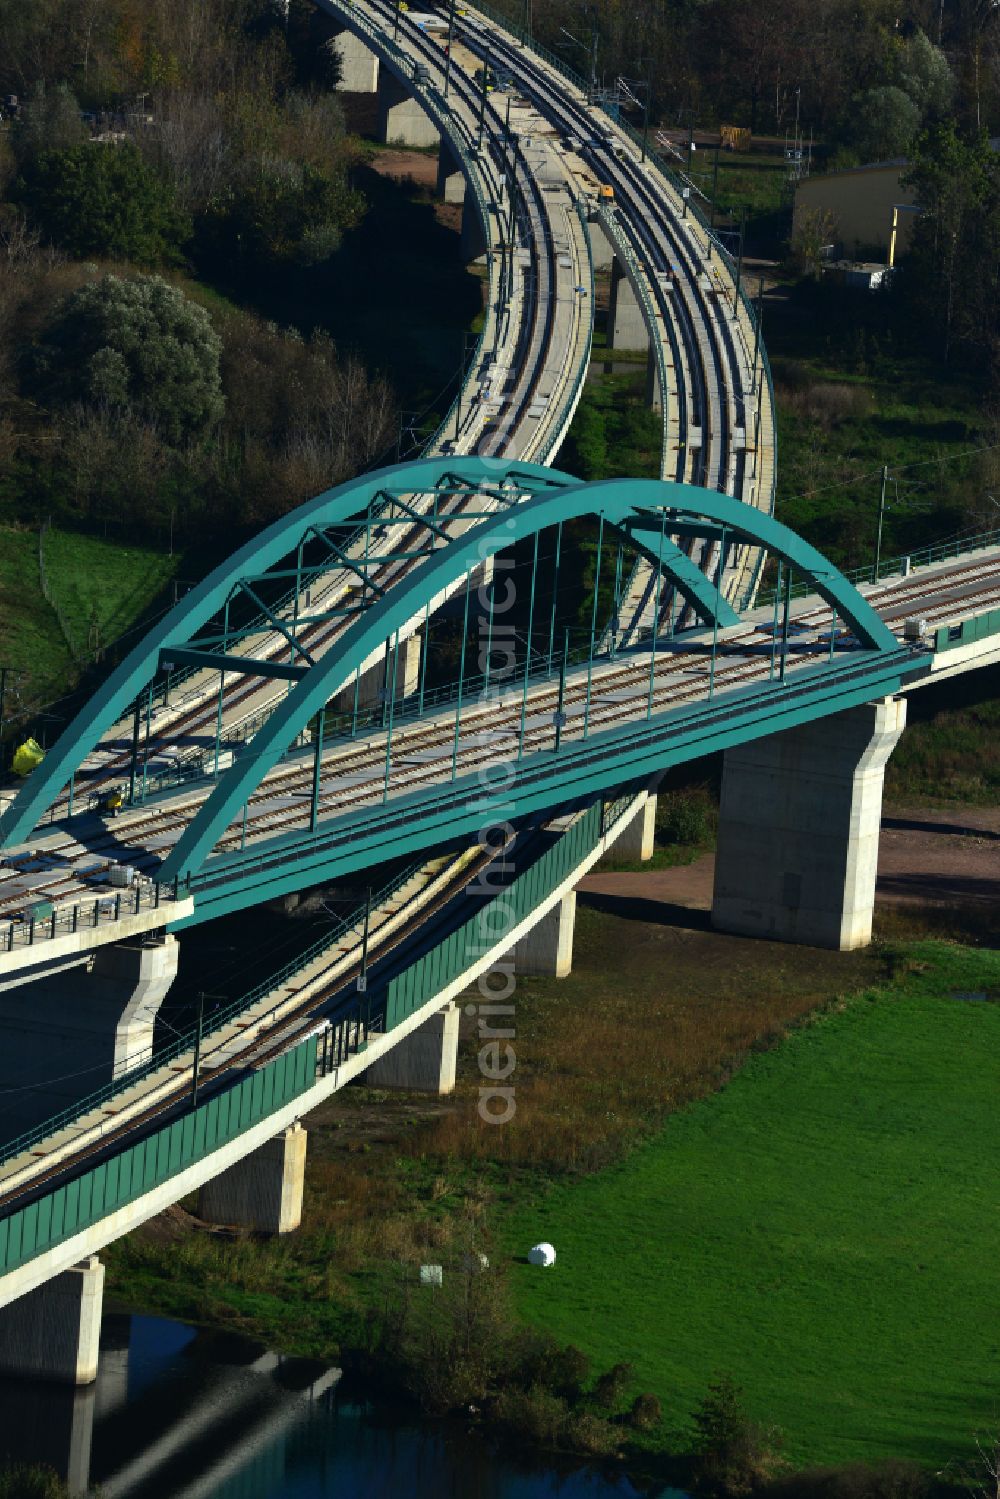 Aerial image Rattmannsdorf - Viaduct of the railway bridge structure to route the railway tracks in Rattmannsdorf in the state Saxony-Anhalt, Germany